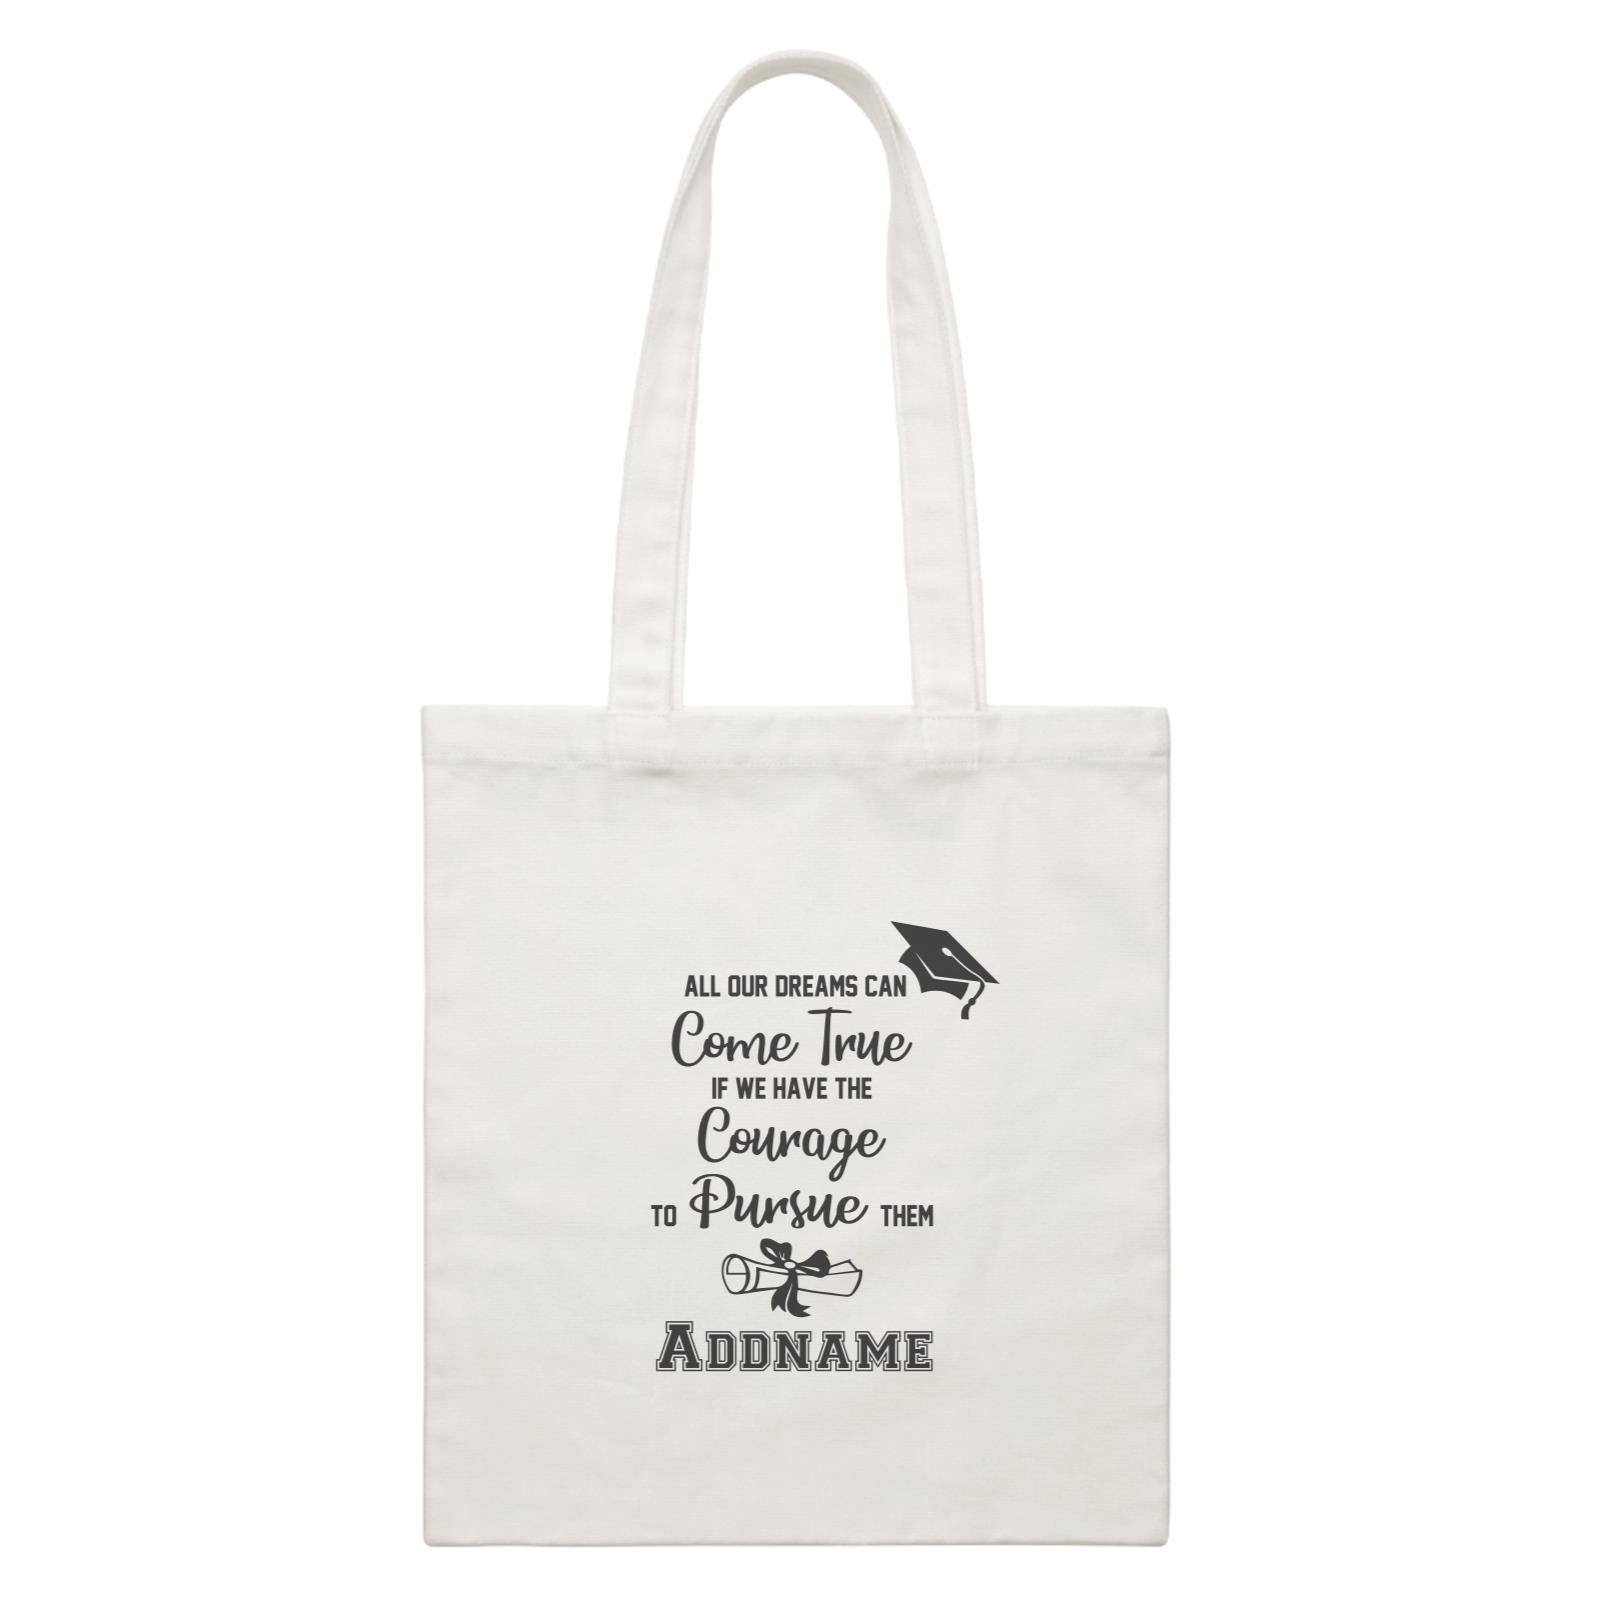 Graduation Series All Our Dreams Can Come True If We Have The Courage To Persue Them White Canvas Bag